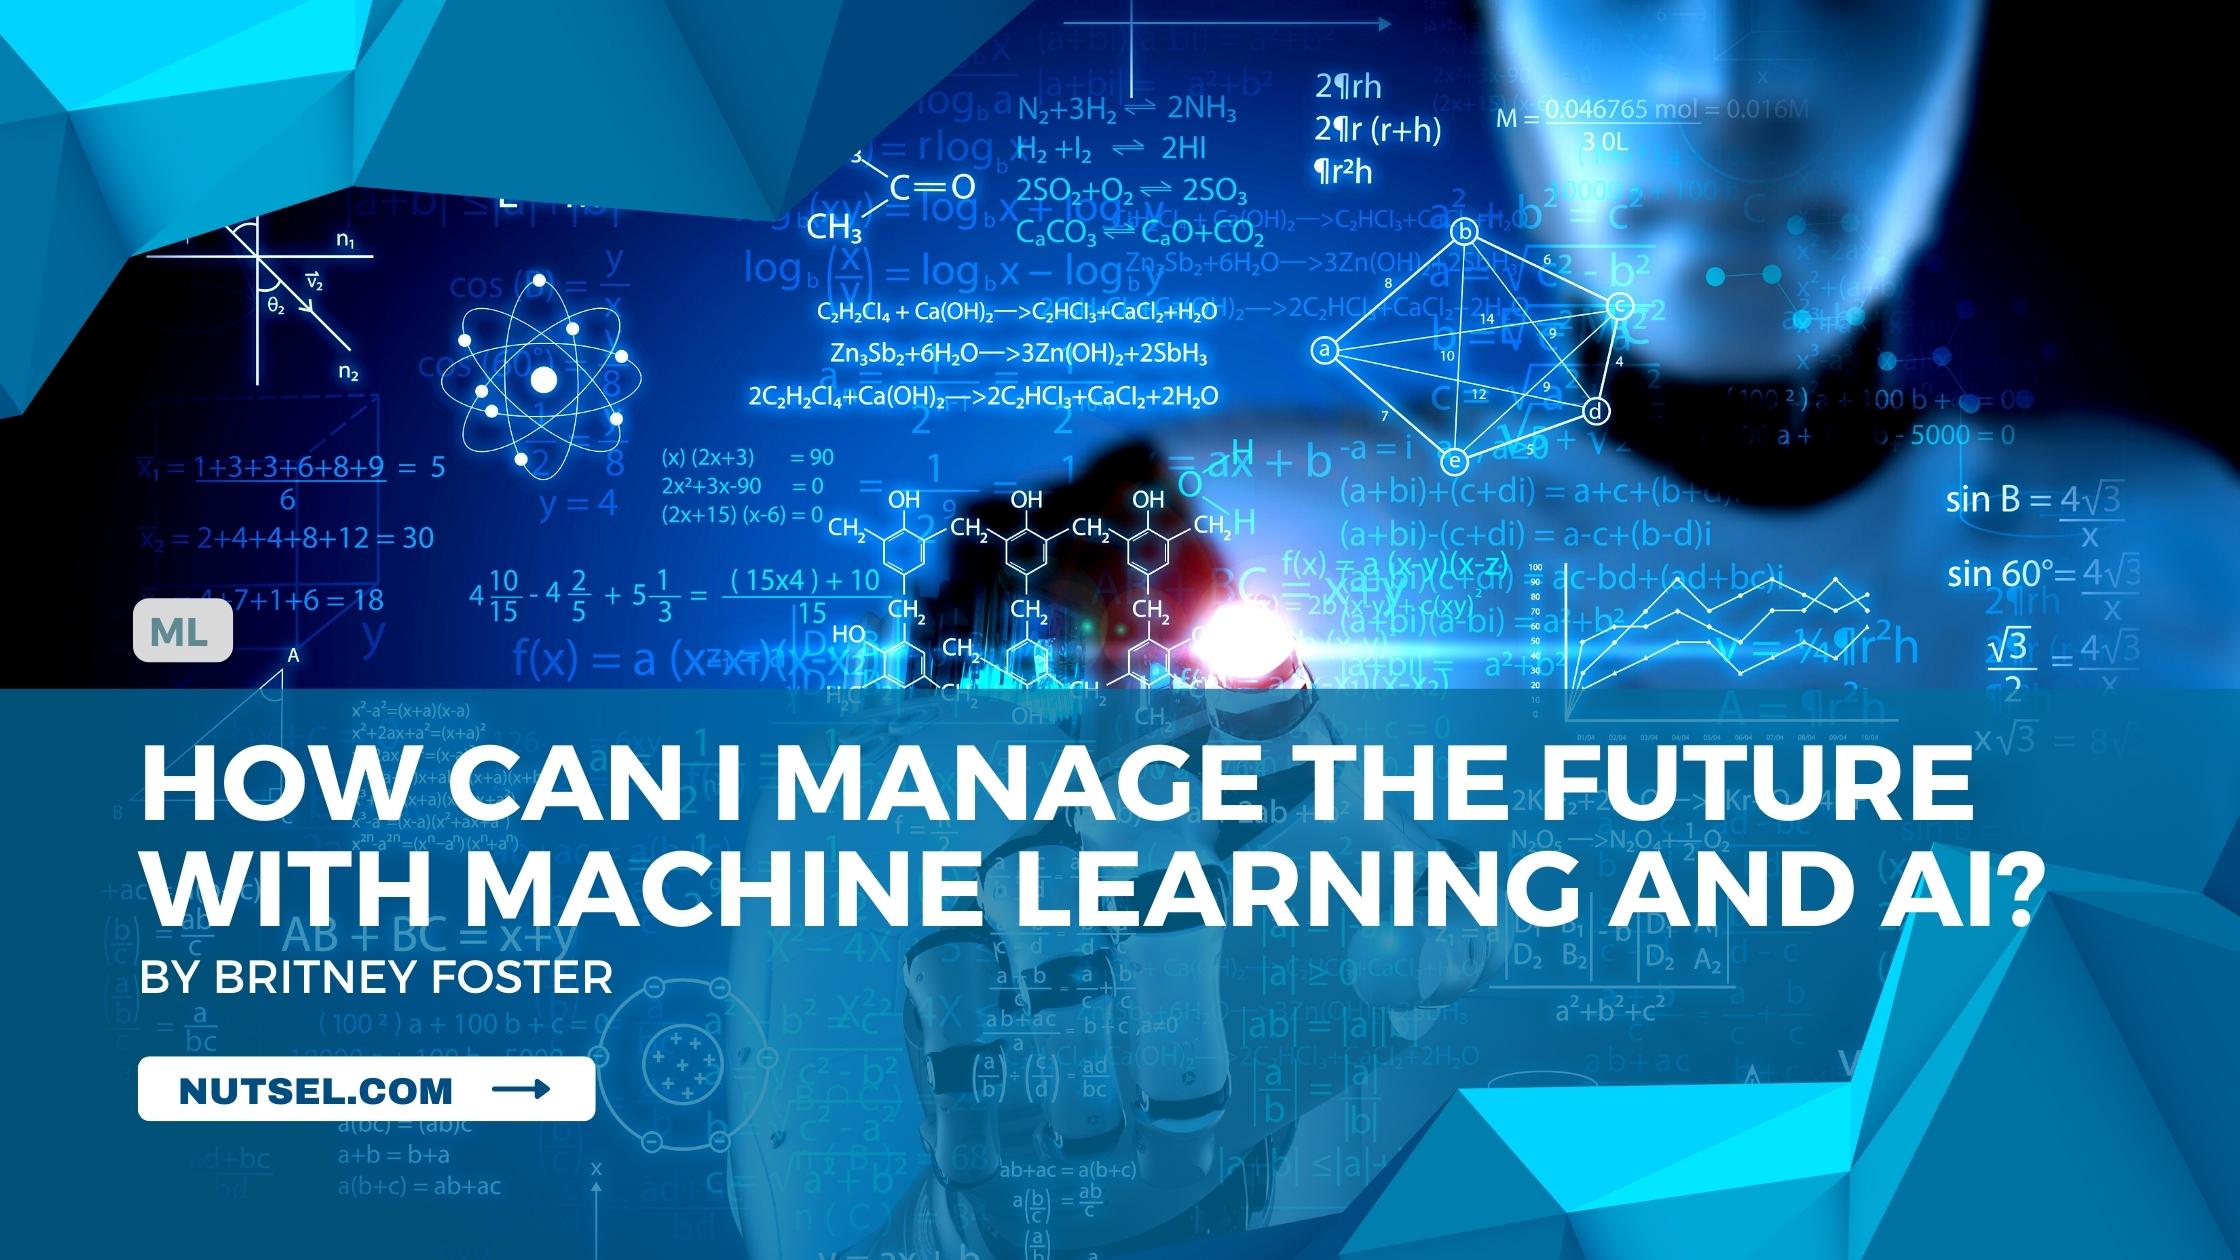 How can I manage the future with machine learning and AI?